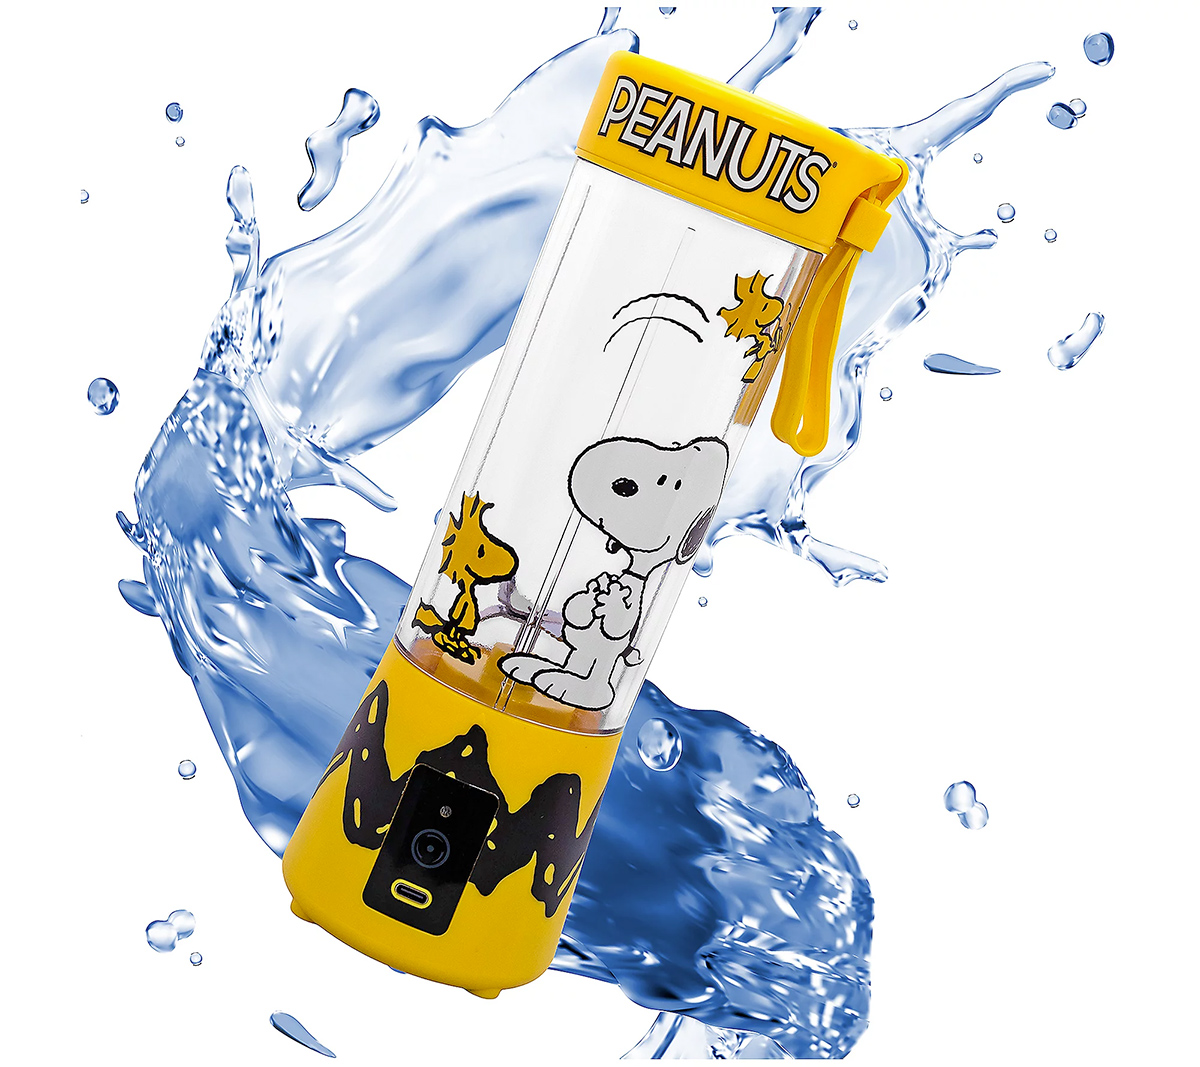 Peanuts Snoopy & Woodstock Mini Portable Blender with USB Rechargeable Battery